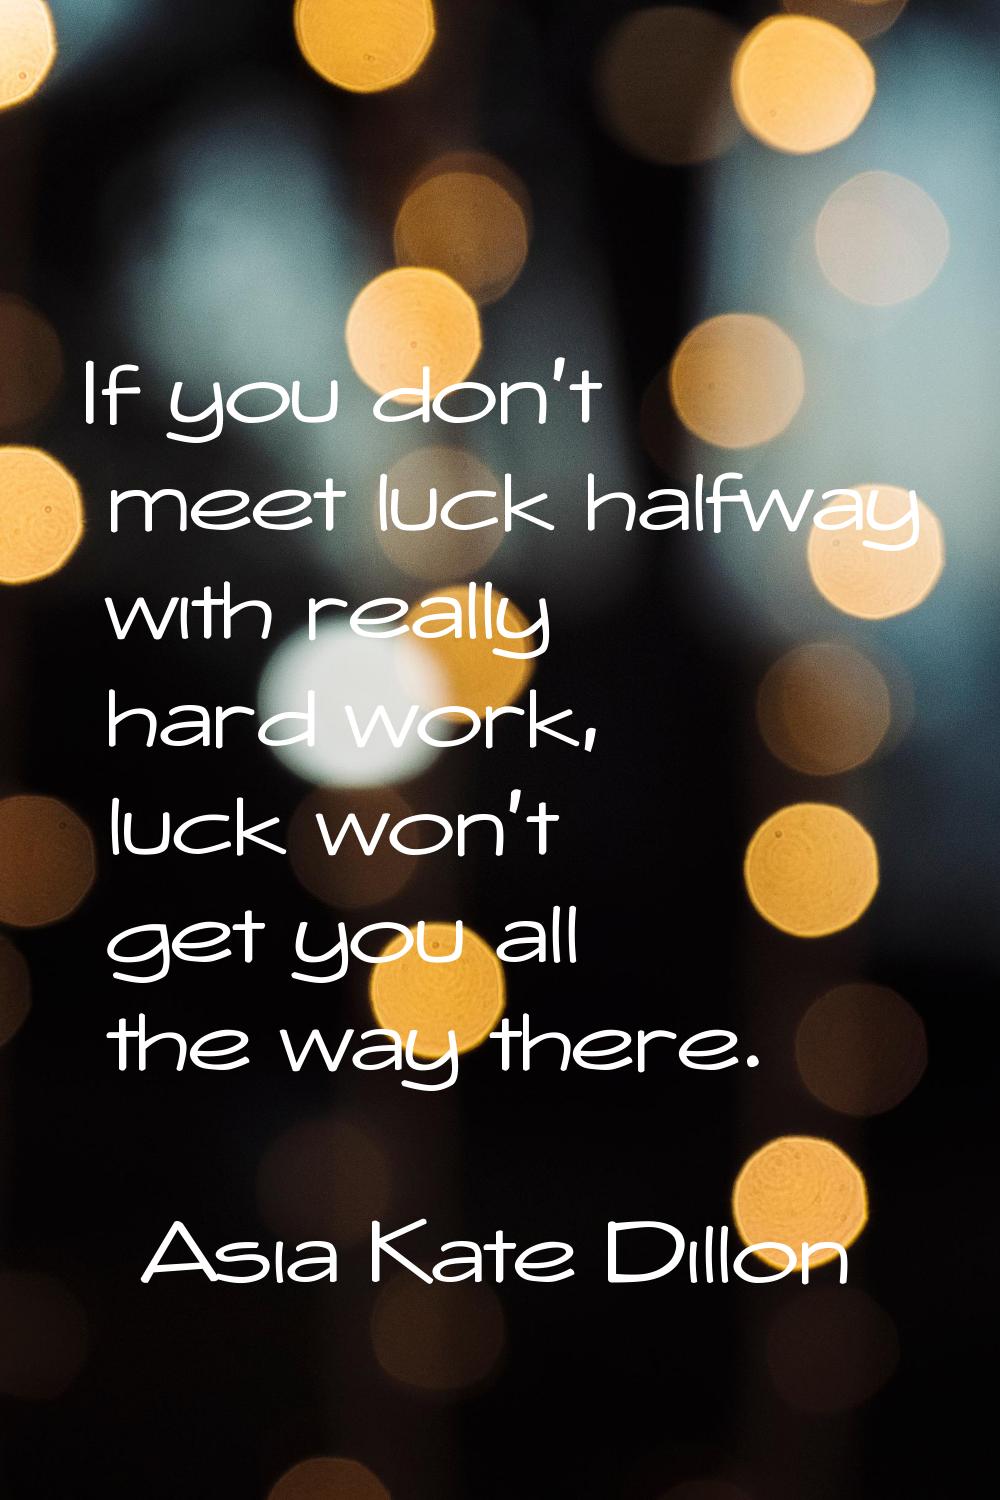 If you don't meet luck halfway with really hard work, luck won't get you all the way there.